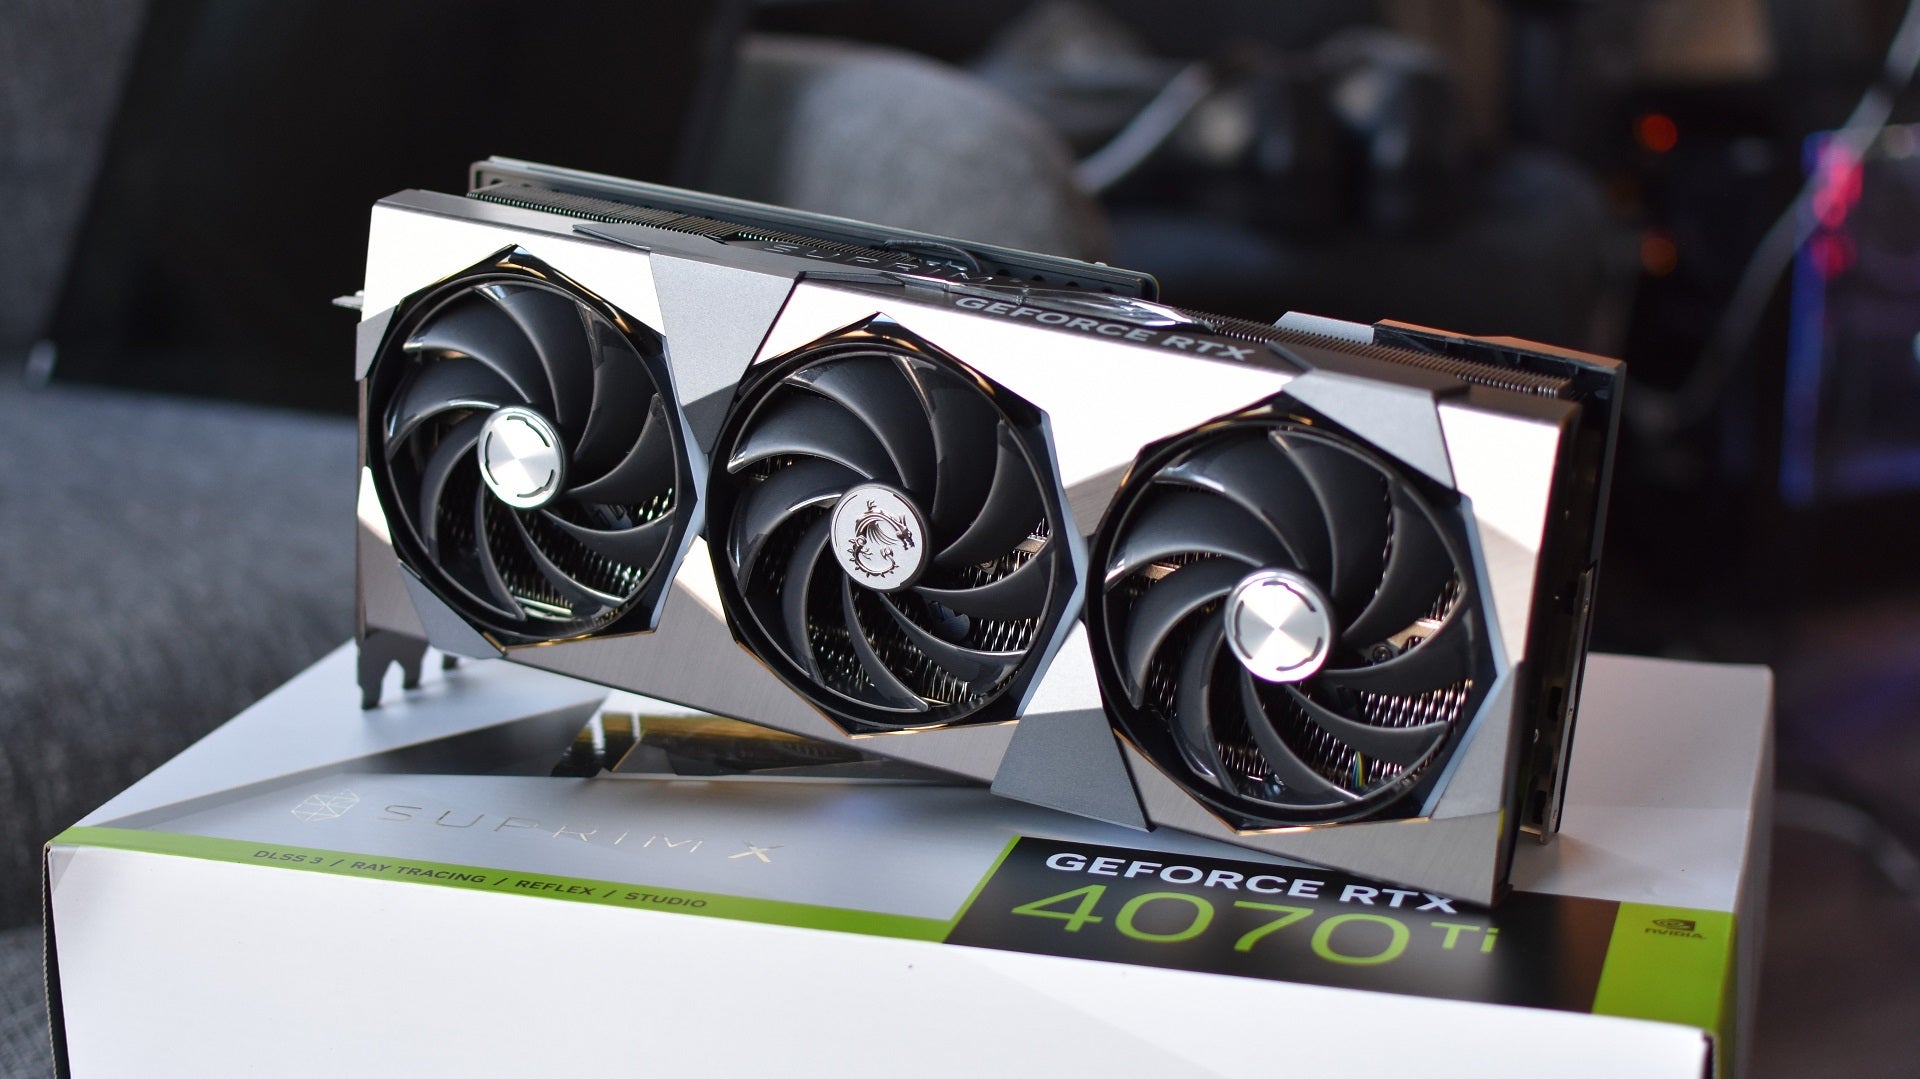 The triple-fan cooler on the MSI GeForce RTX 4070 Ti Suprim X 12G graphics card.